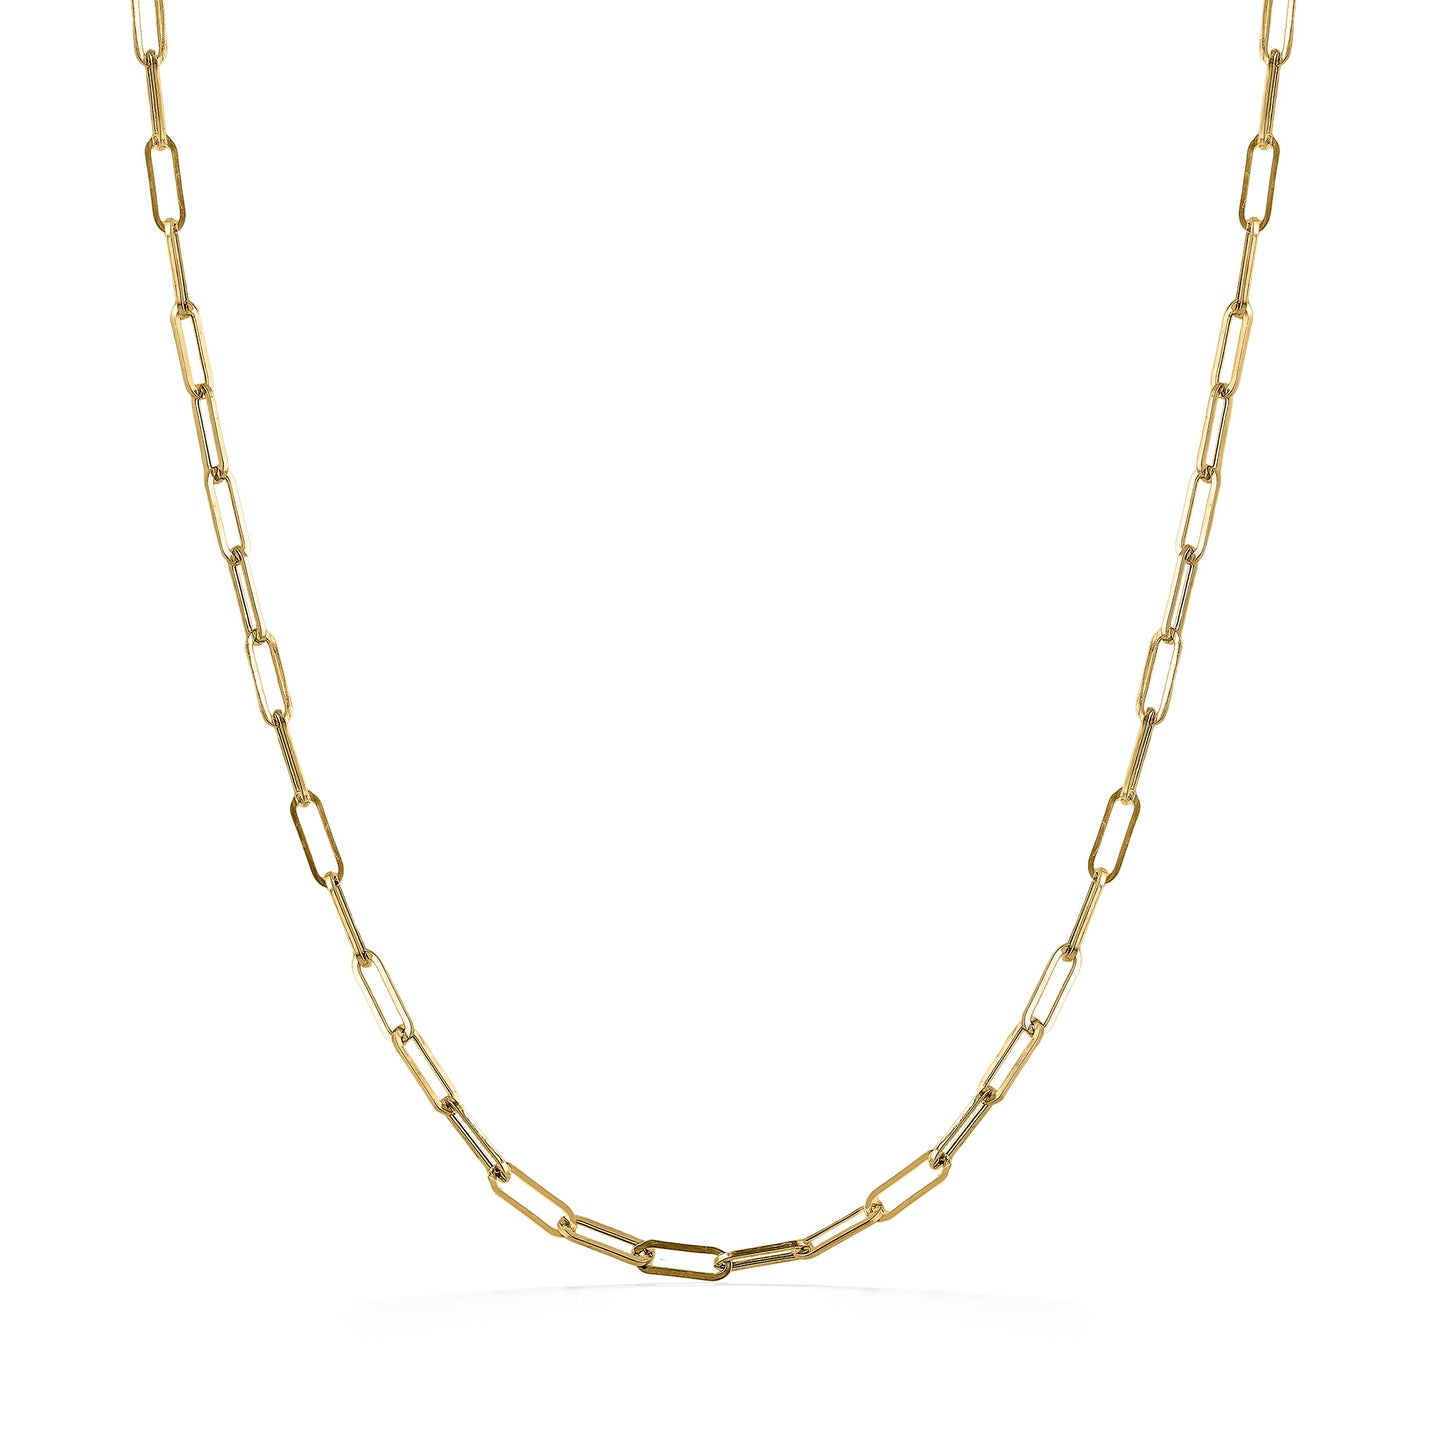 771264 - 14K Yellow Gold - 18" Paperclip Chain, 1.95mm